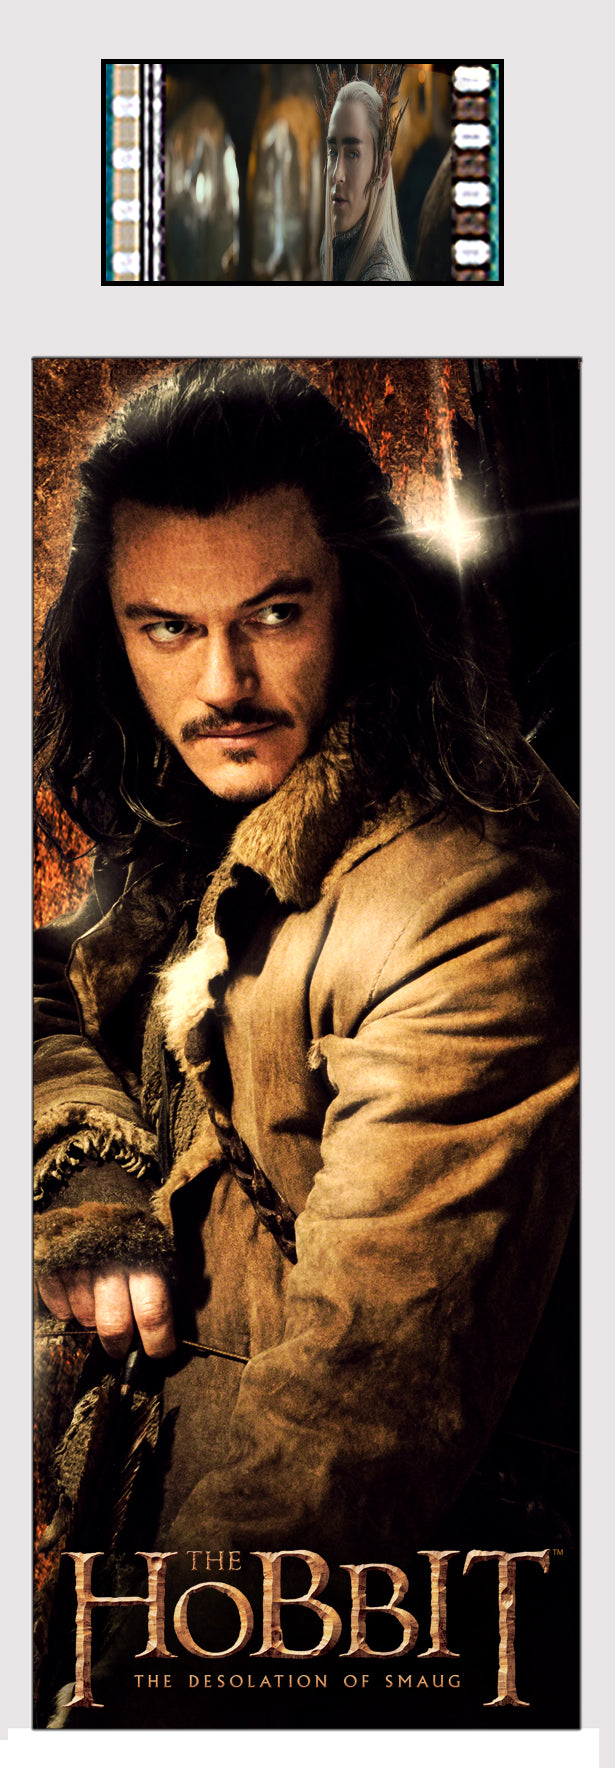 THE HOBBIT: THE DESOLATION OF SMAUG (Bard the Bowman) FilmCells™ Bookmark USBM659